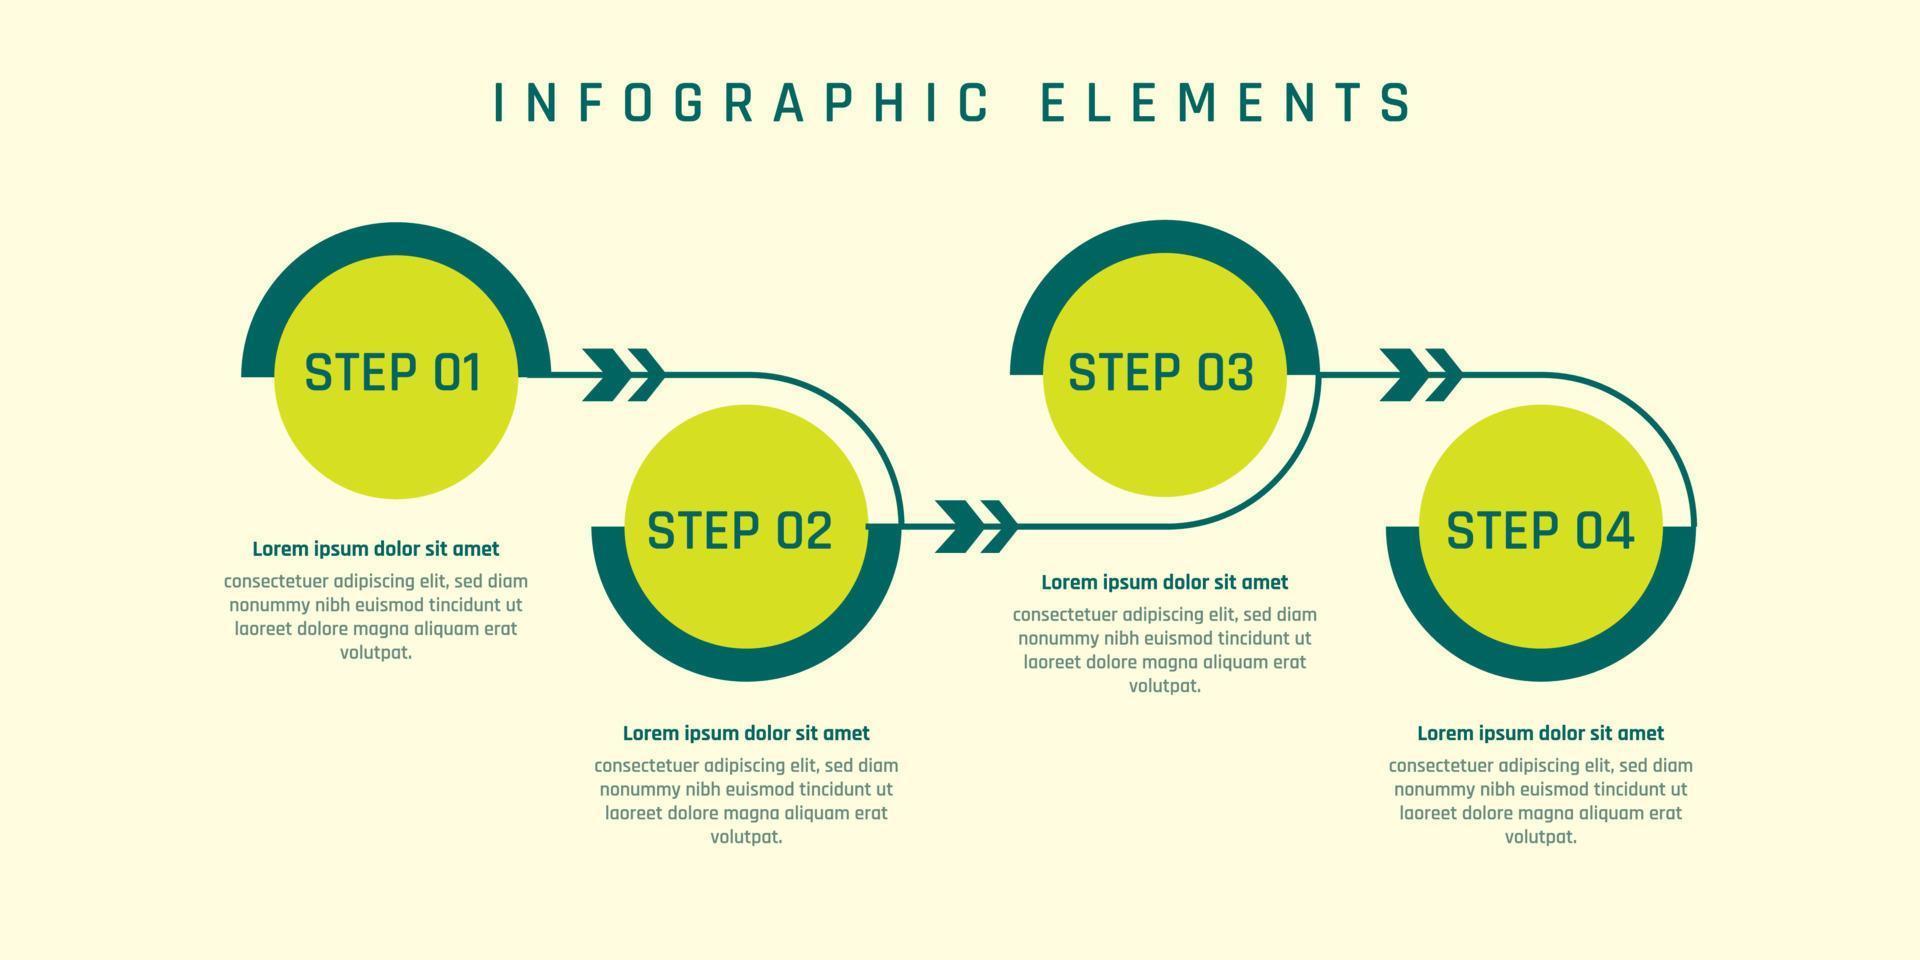 5 steps yellow and green milestone company profile infographic vector